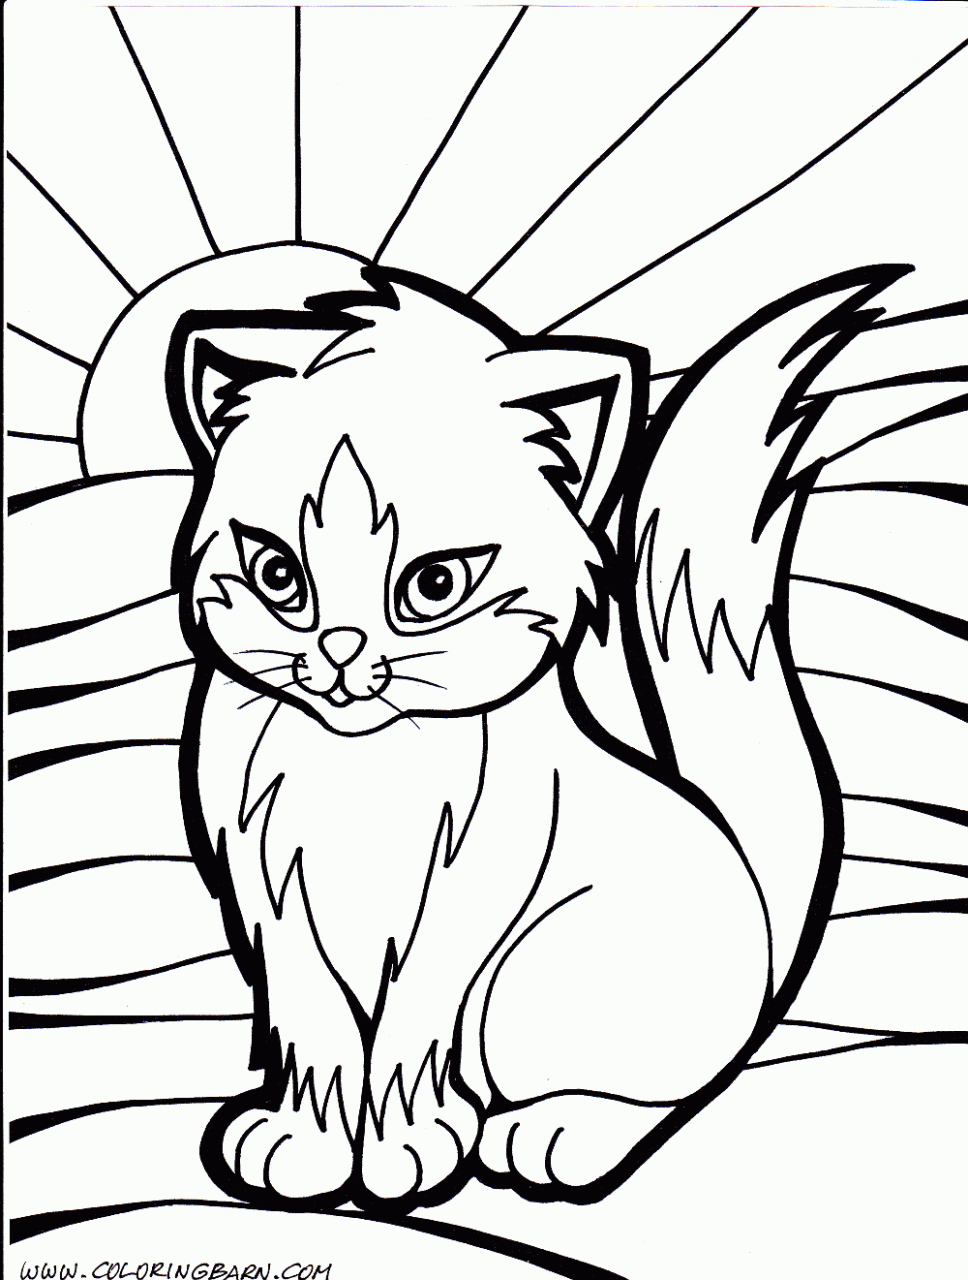 Easy Cute Cat Coloring Pages